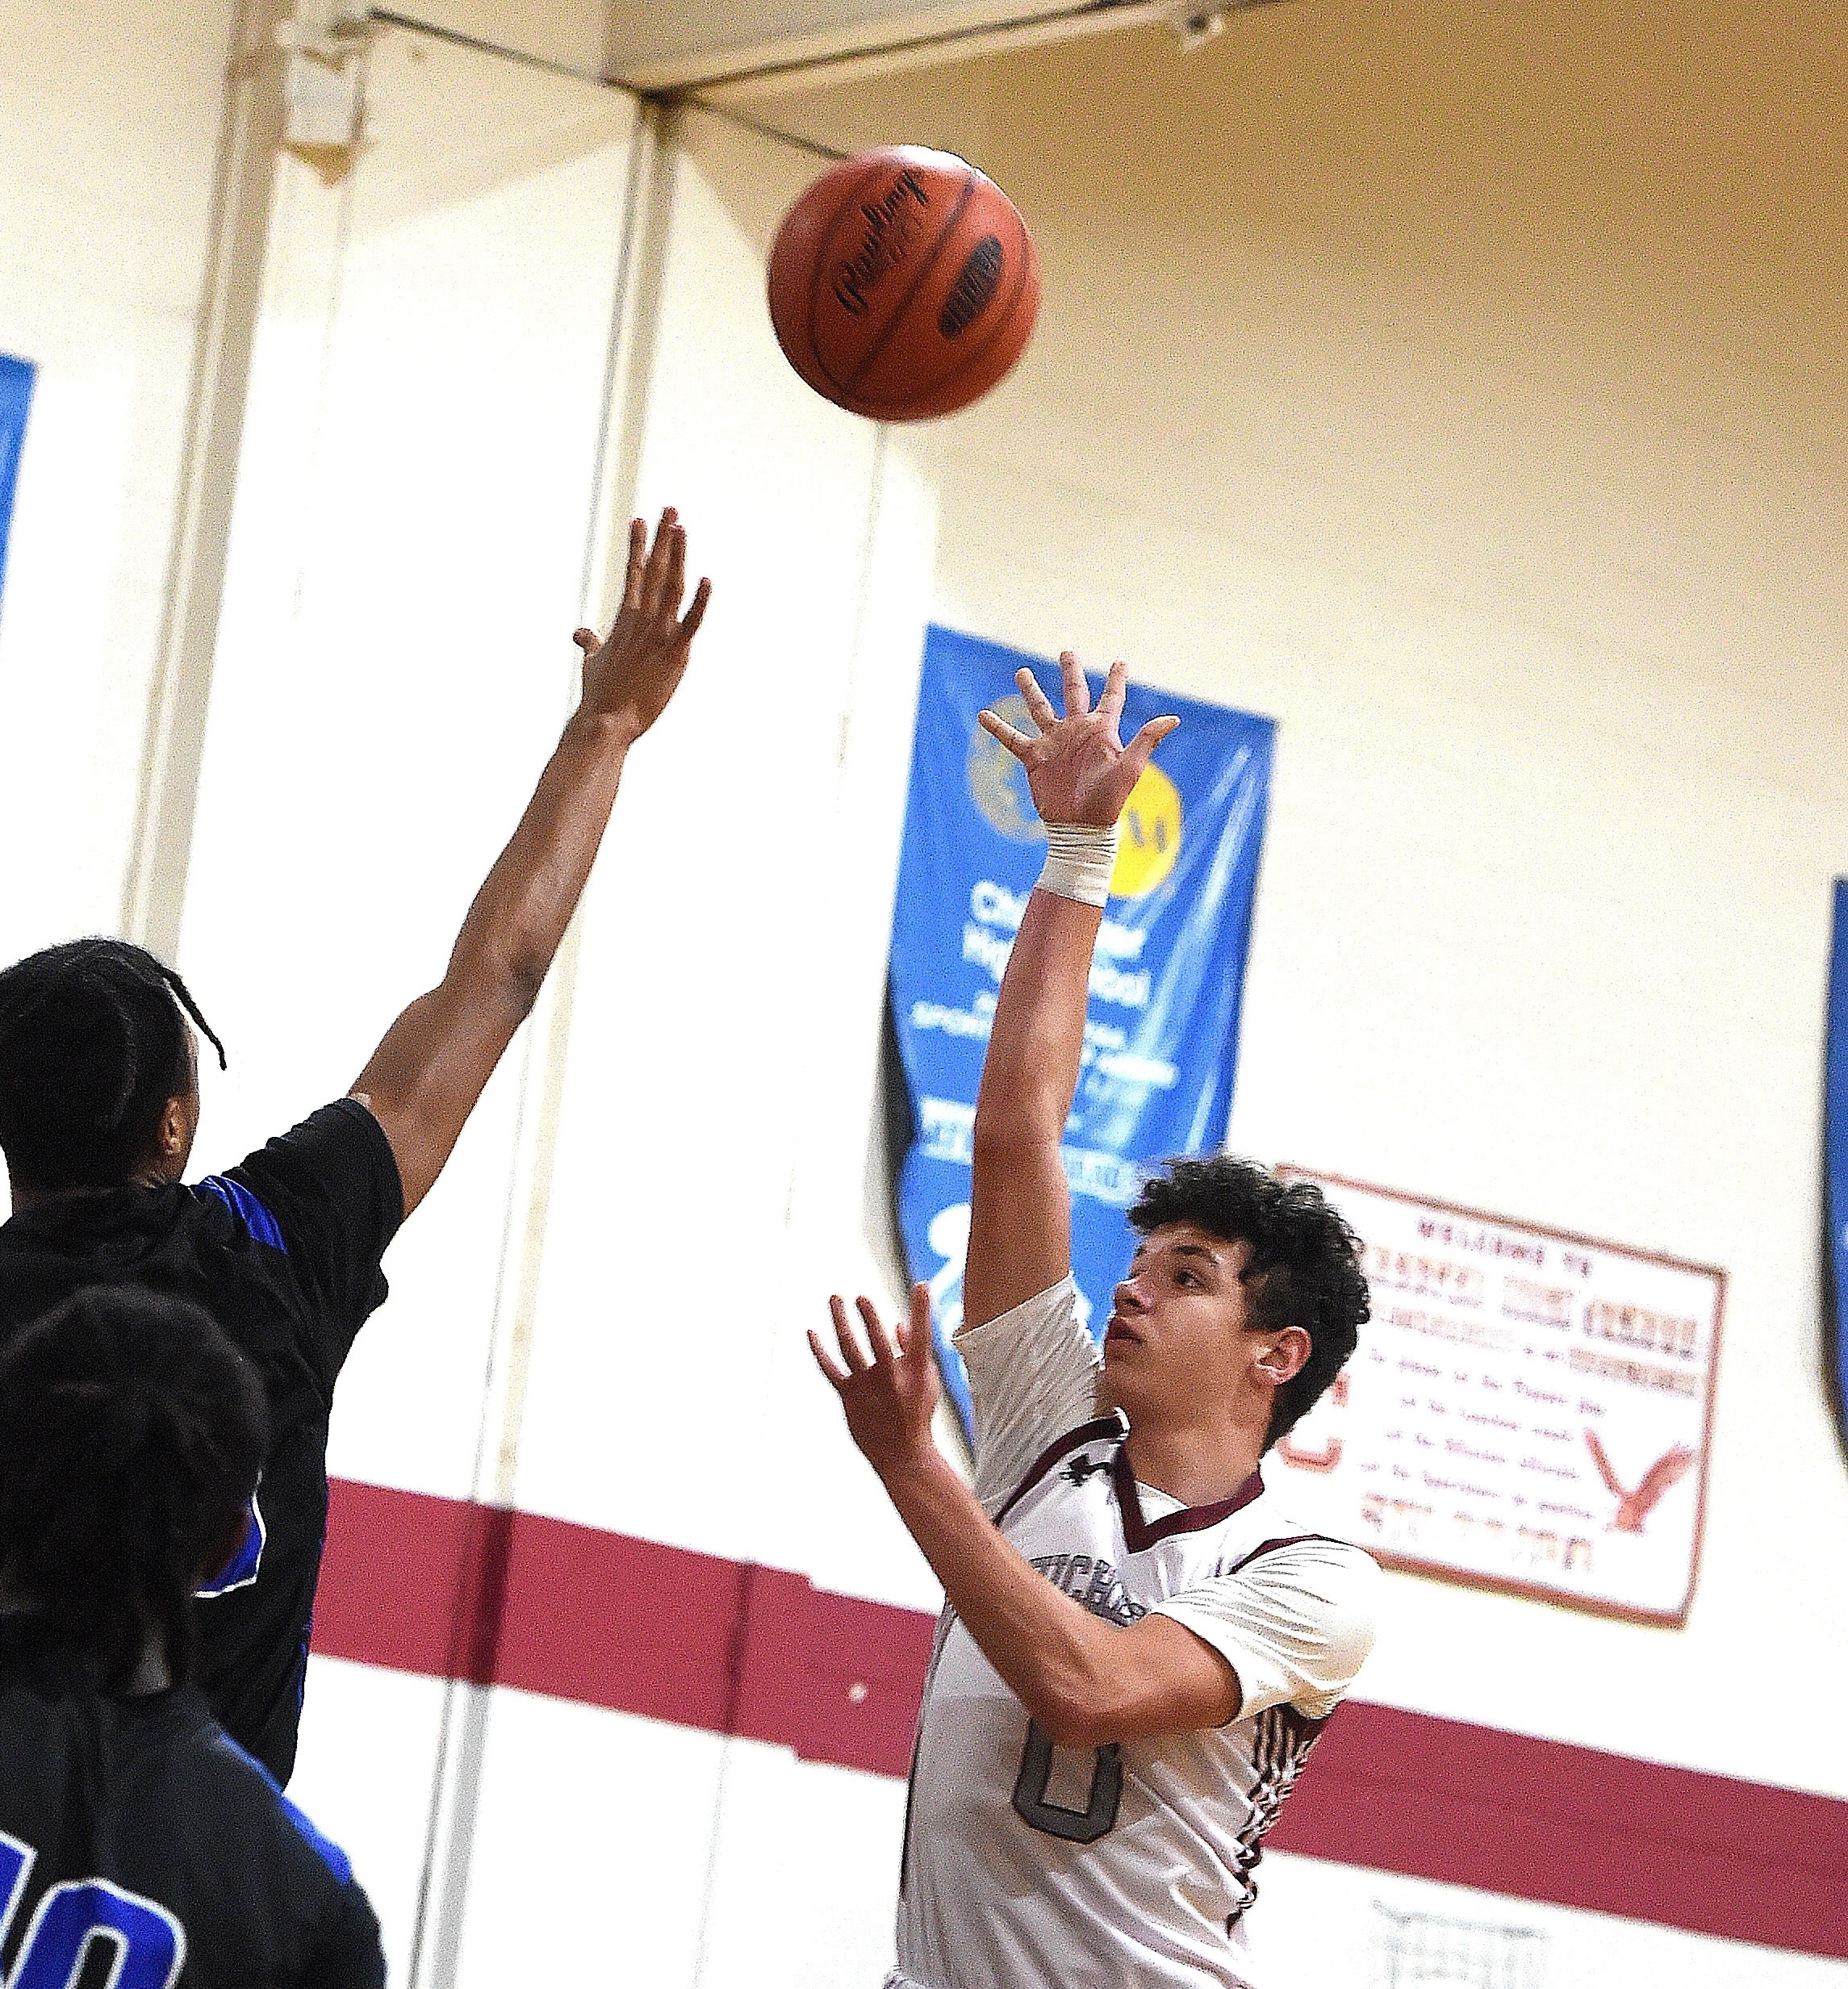 Boys Basketball Maz Sayed gets hot, Chichester outscores Springfield